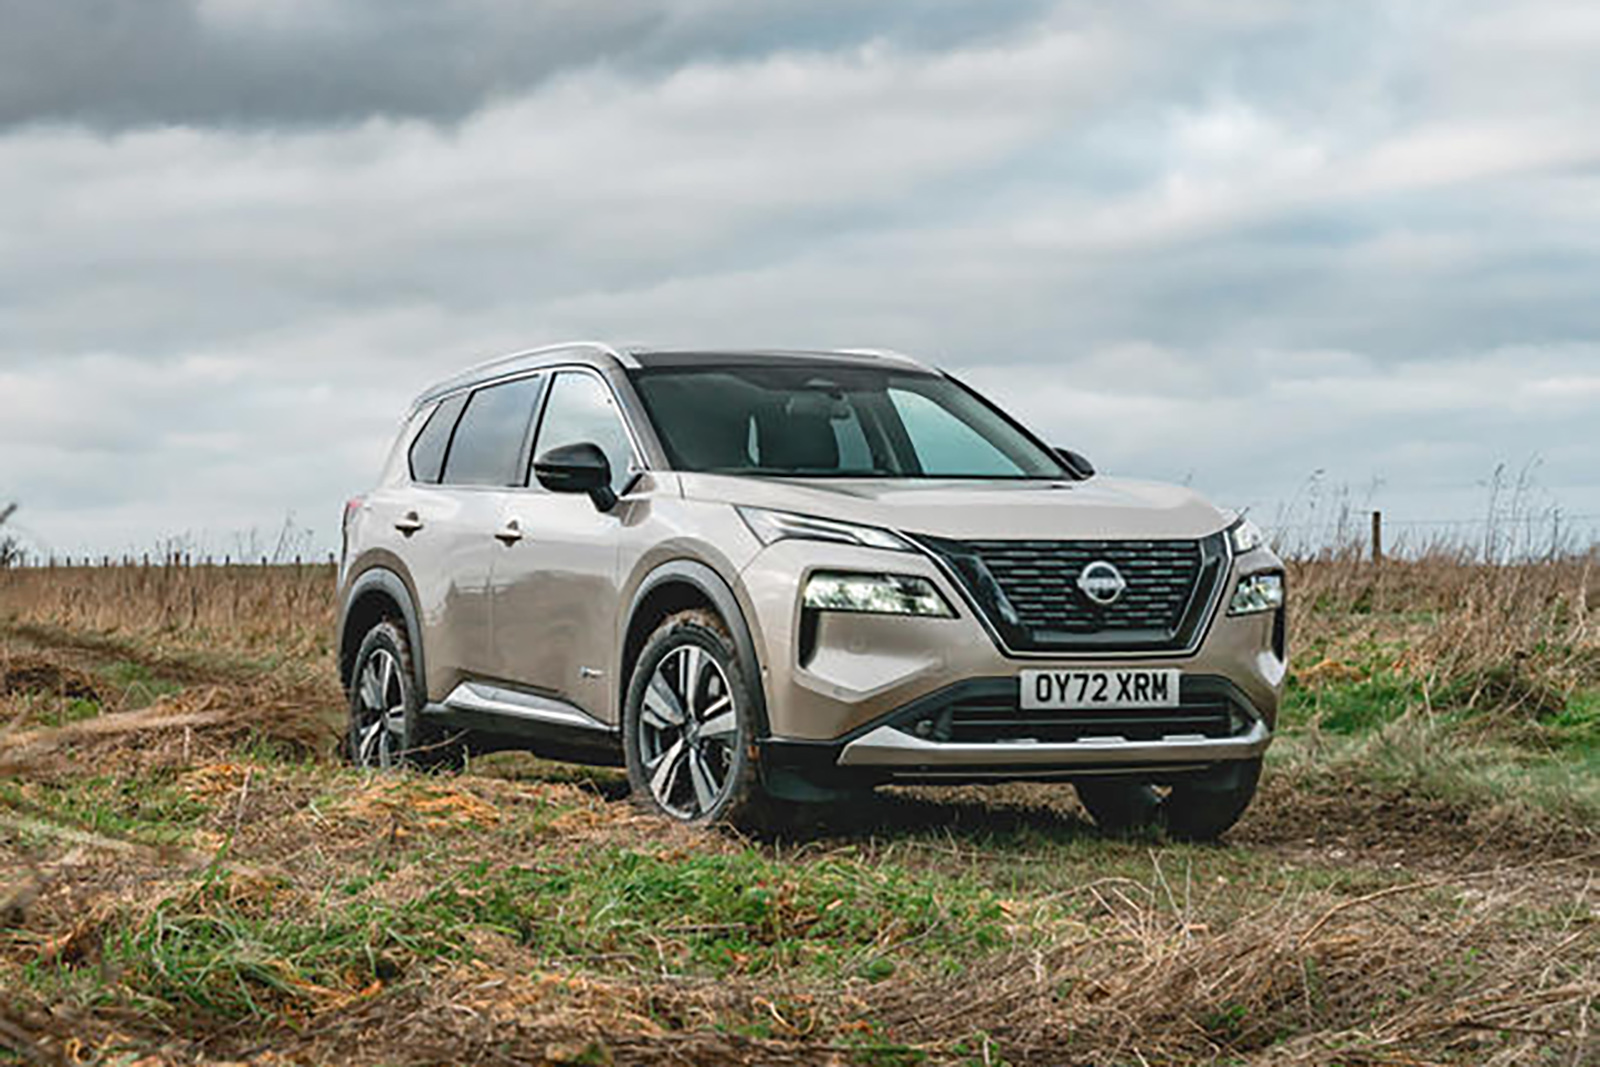 The used car guide to the Nissan Qashqai Mk 1 - 5-dr compact crossover